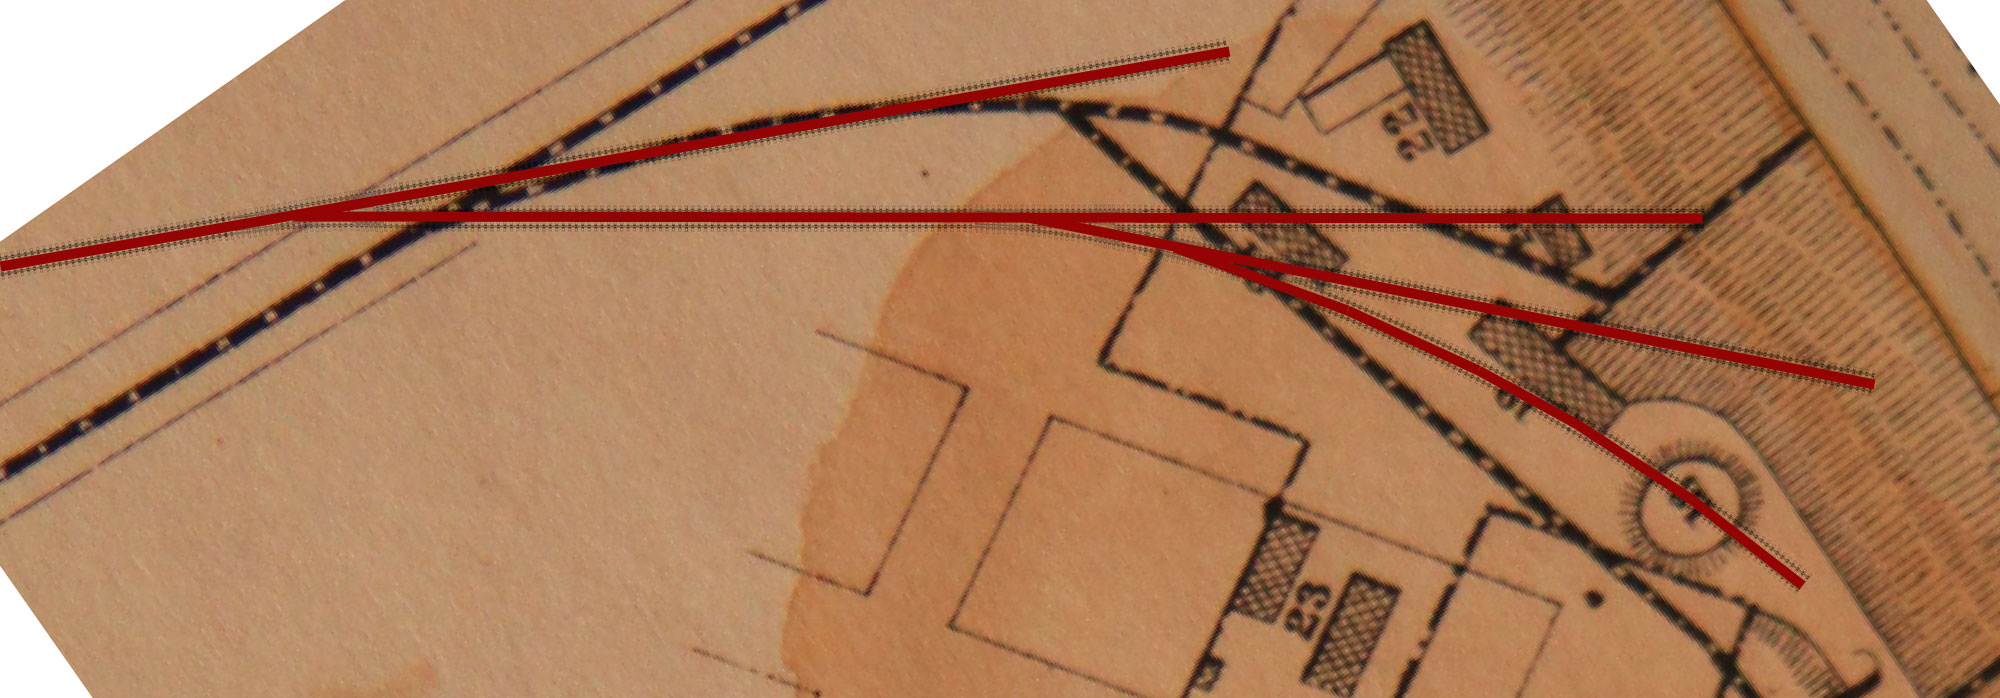 Track Plan (red) Over Map